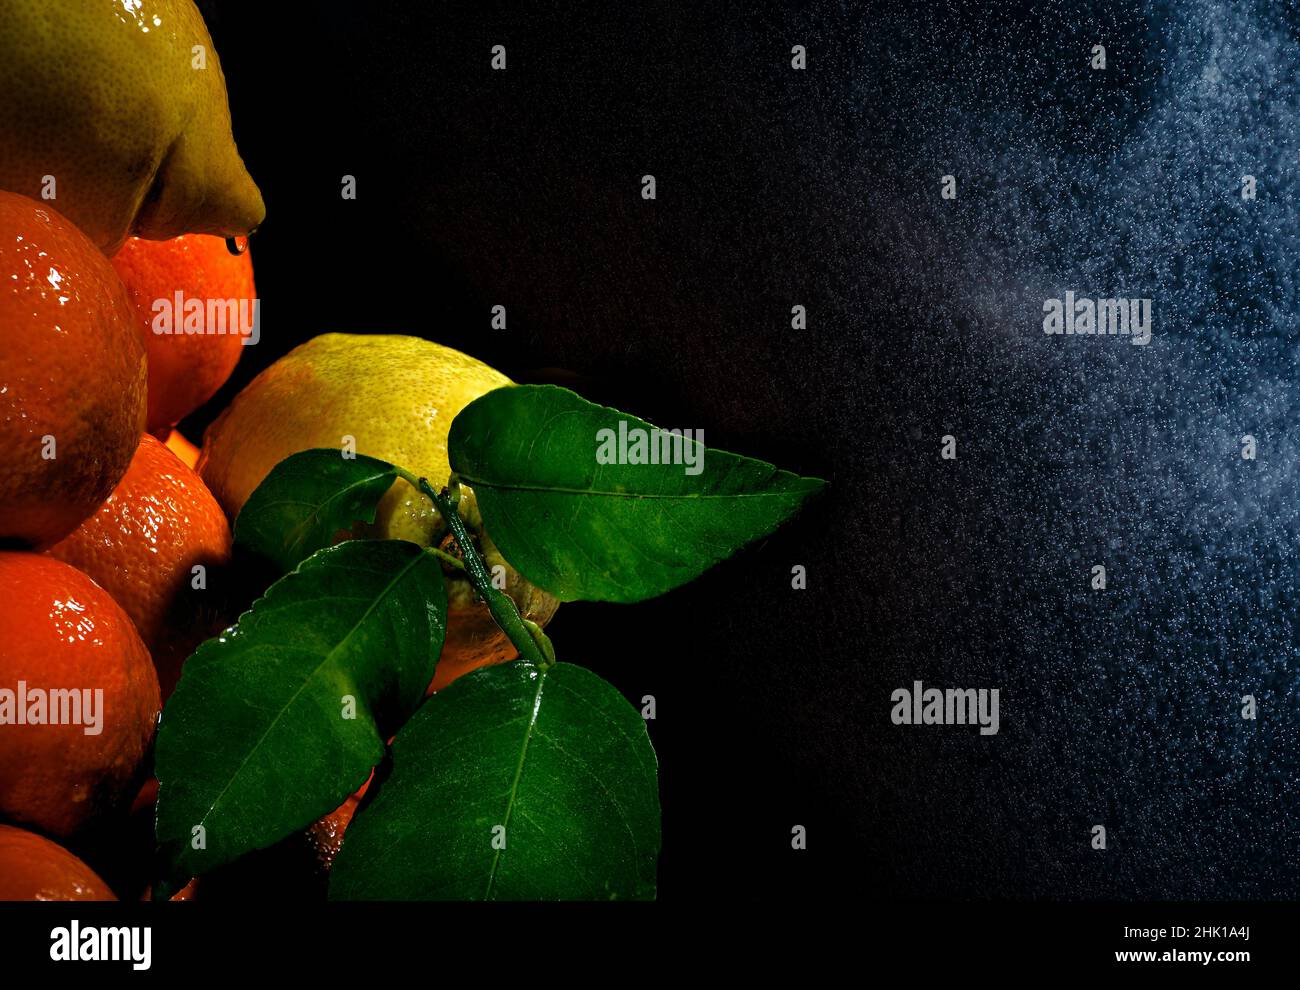 Fruits on a black background with a watery suspension reminiscent of the starry sky. Orange oranges. Lemons with green leaves. Stock Photo